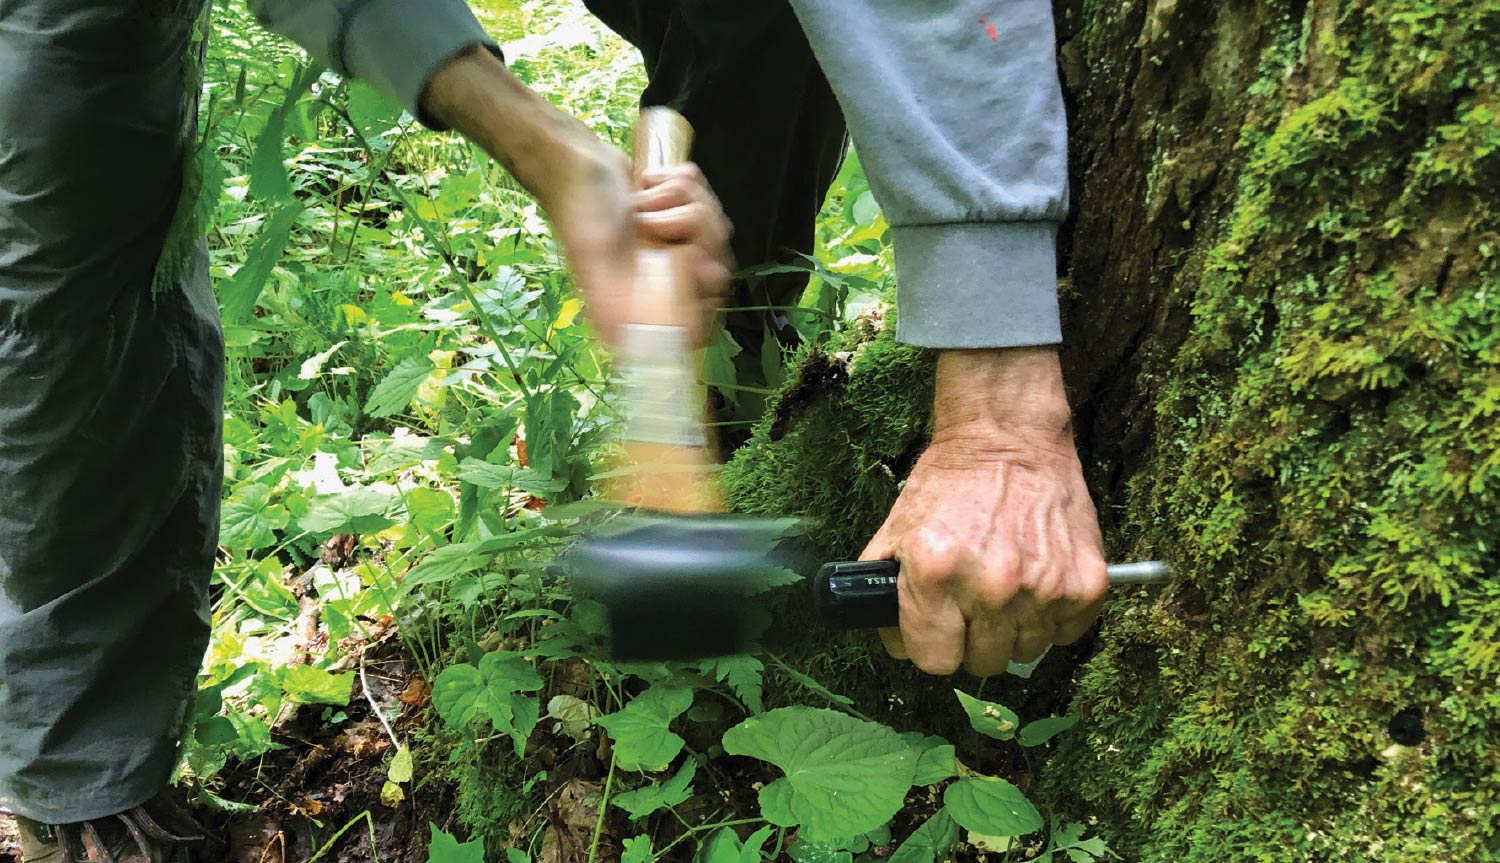 MountainTrue ecologist Bob Gale hammers in an arbor plug in preparation